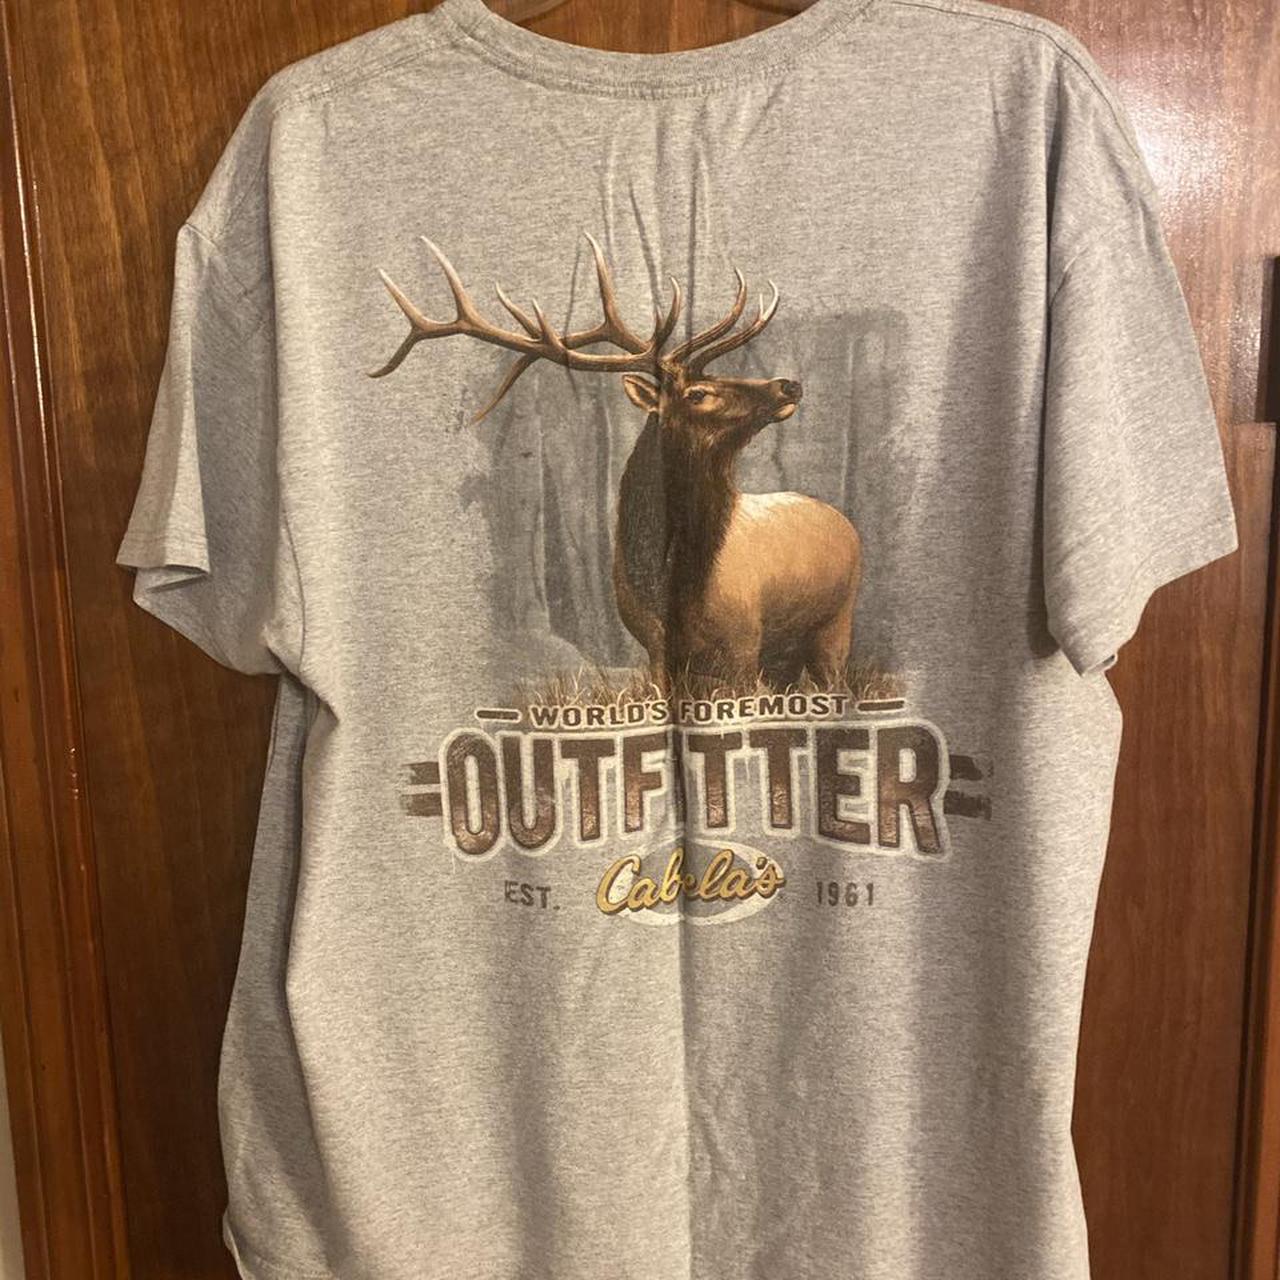 Worlds Foremost Outfitter CABELA'S Since 1961 Mens XL T-Shirt